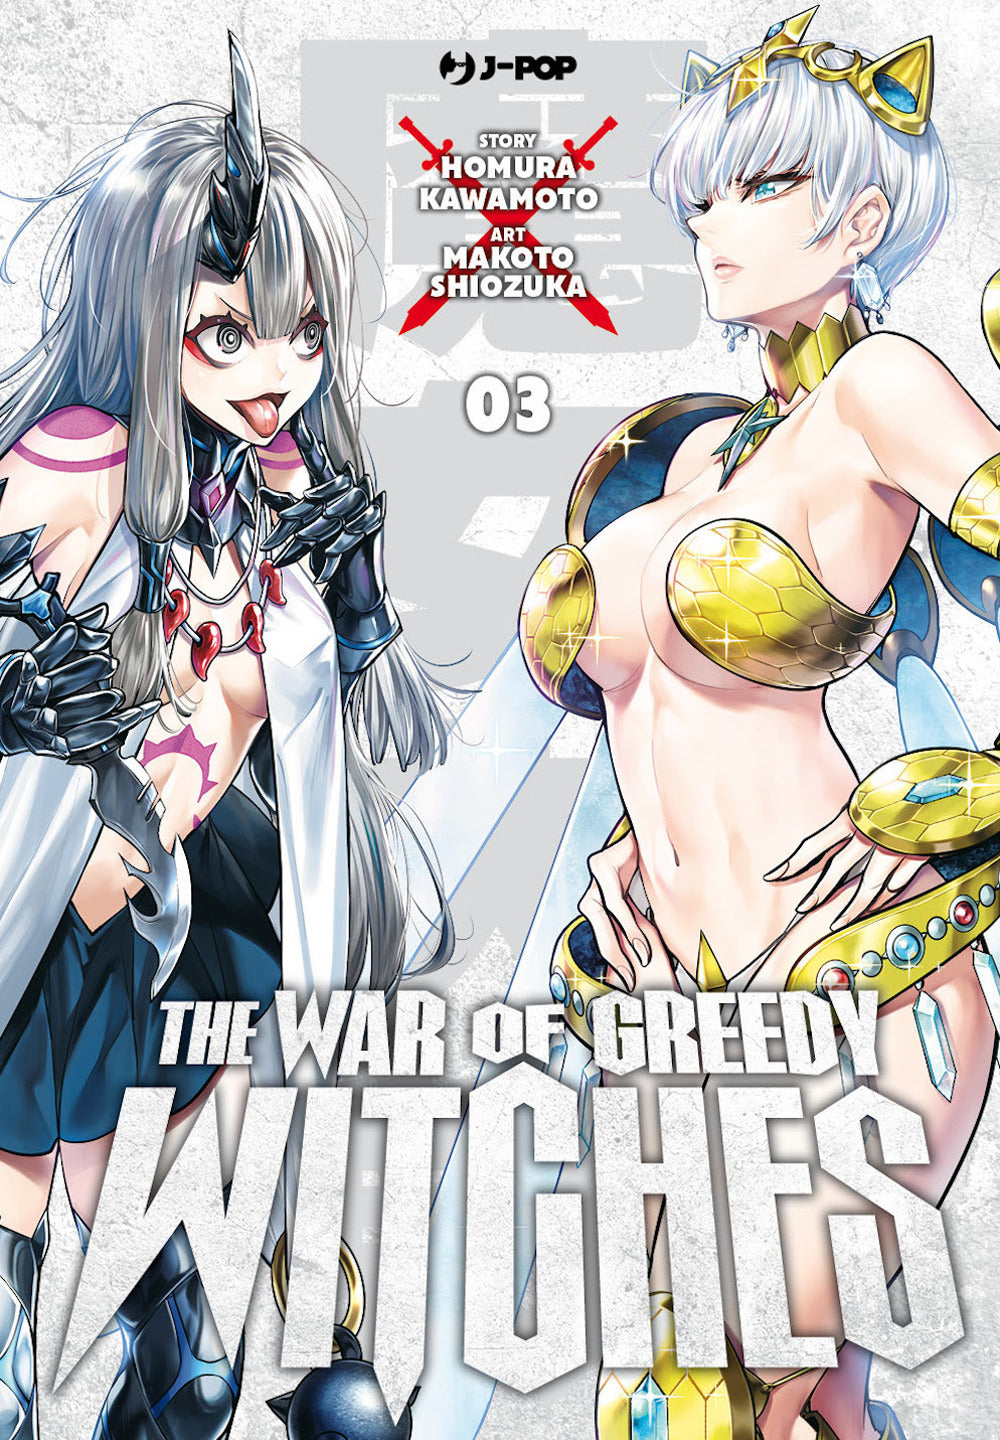 The war of greedy witches. Vol. 3